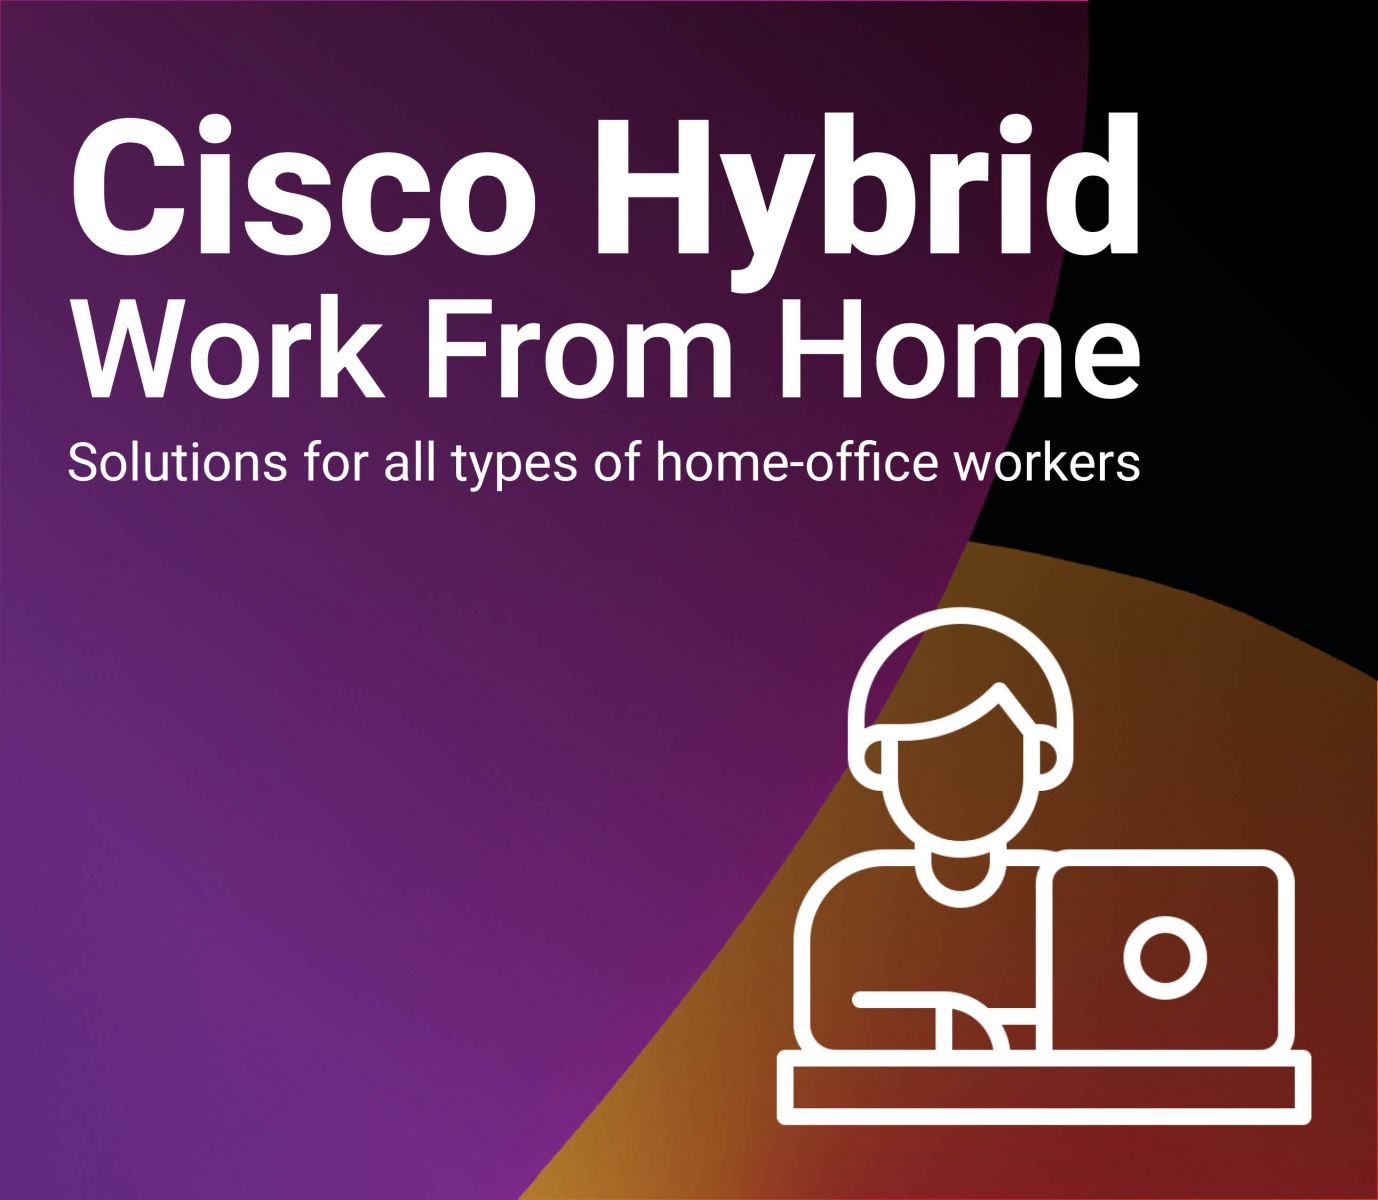 Cisco Hybrid Work From Home Featured Image